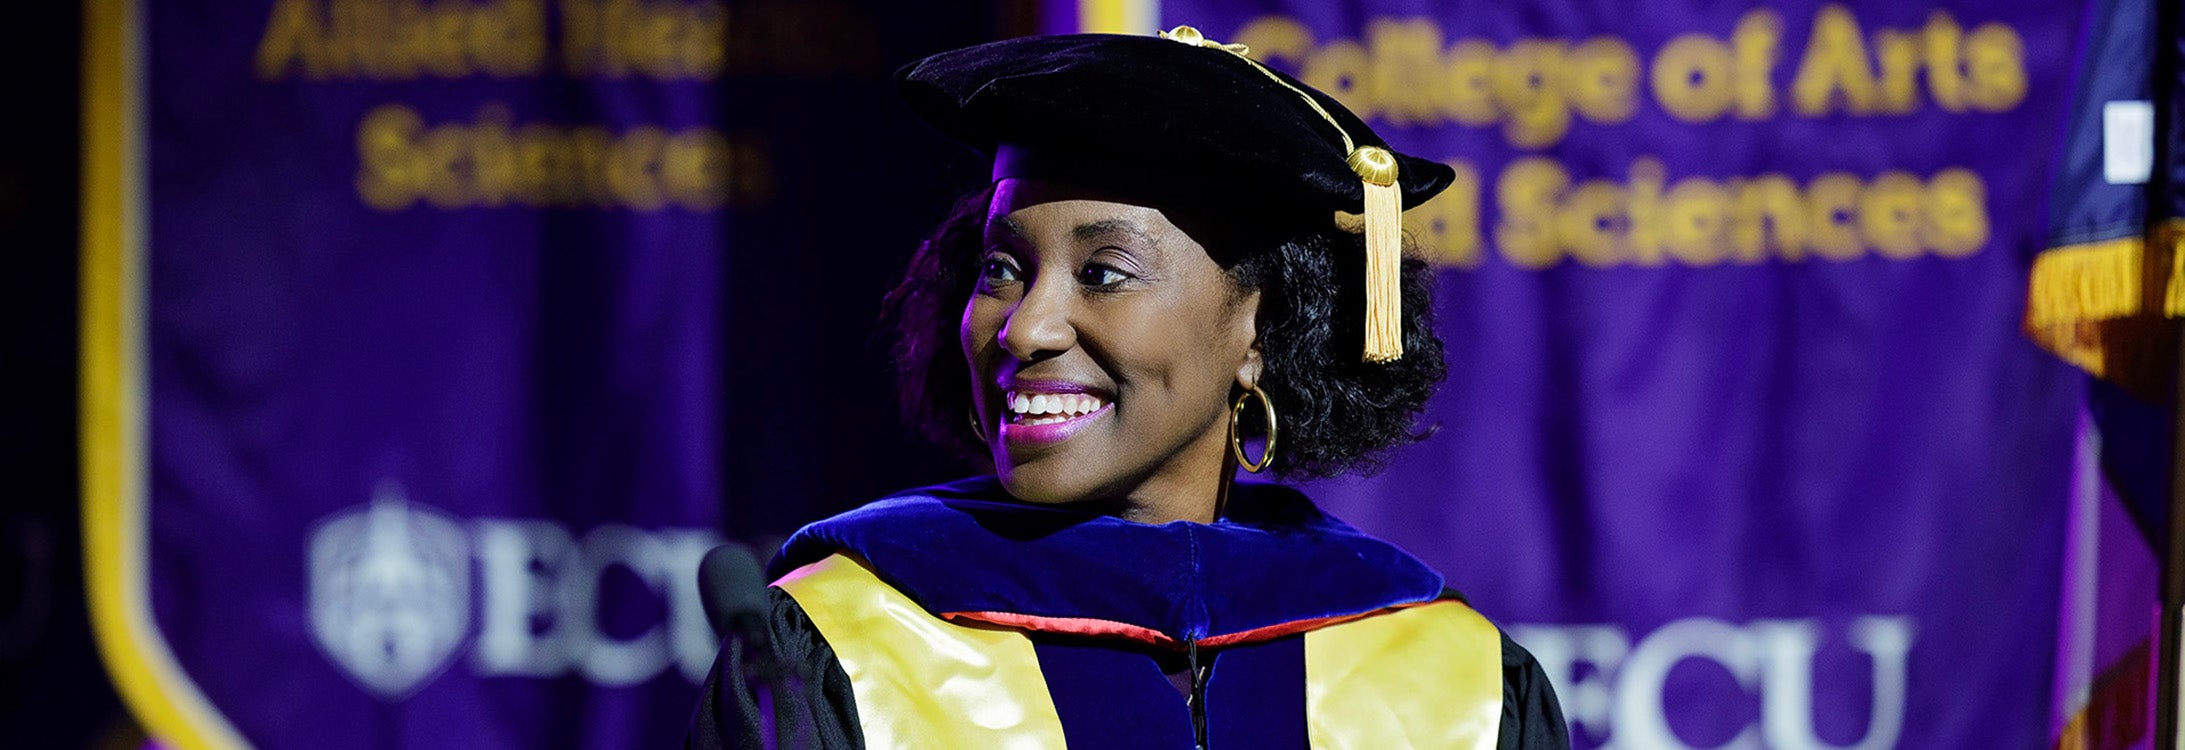 Dr. Virginia Hardy, vice chancellor for student affairs, will retire this month after 29 years at East Carolina University. (Photo by Cliff Hollis)